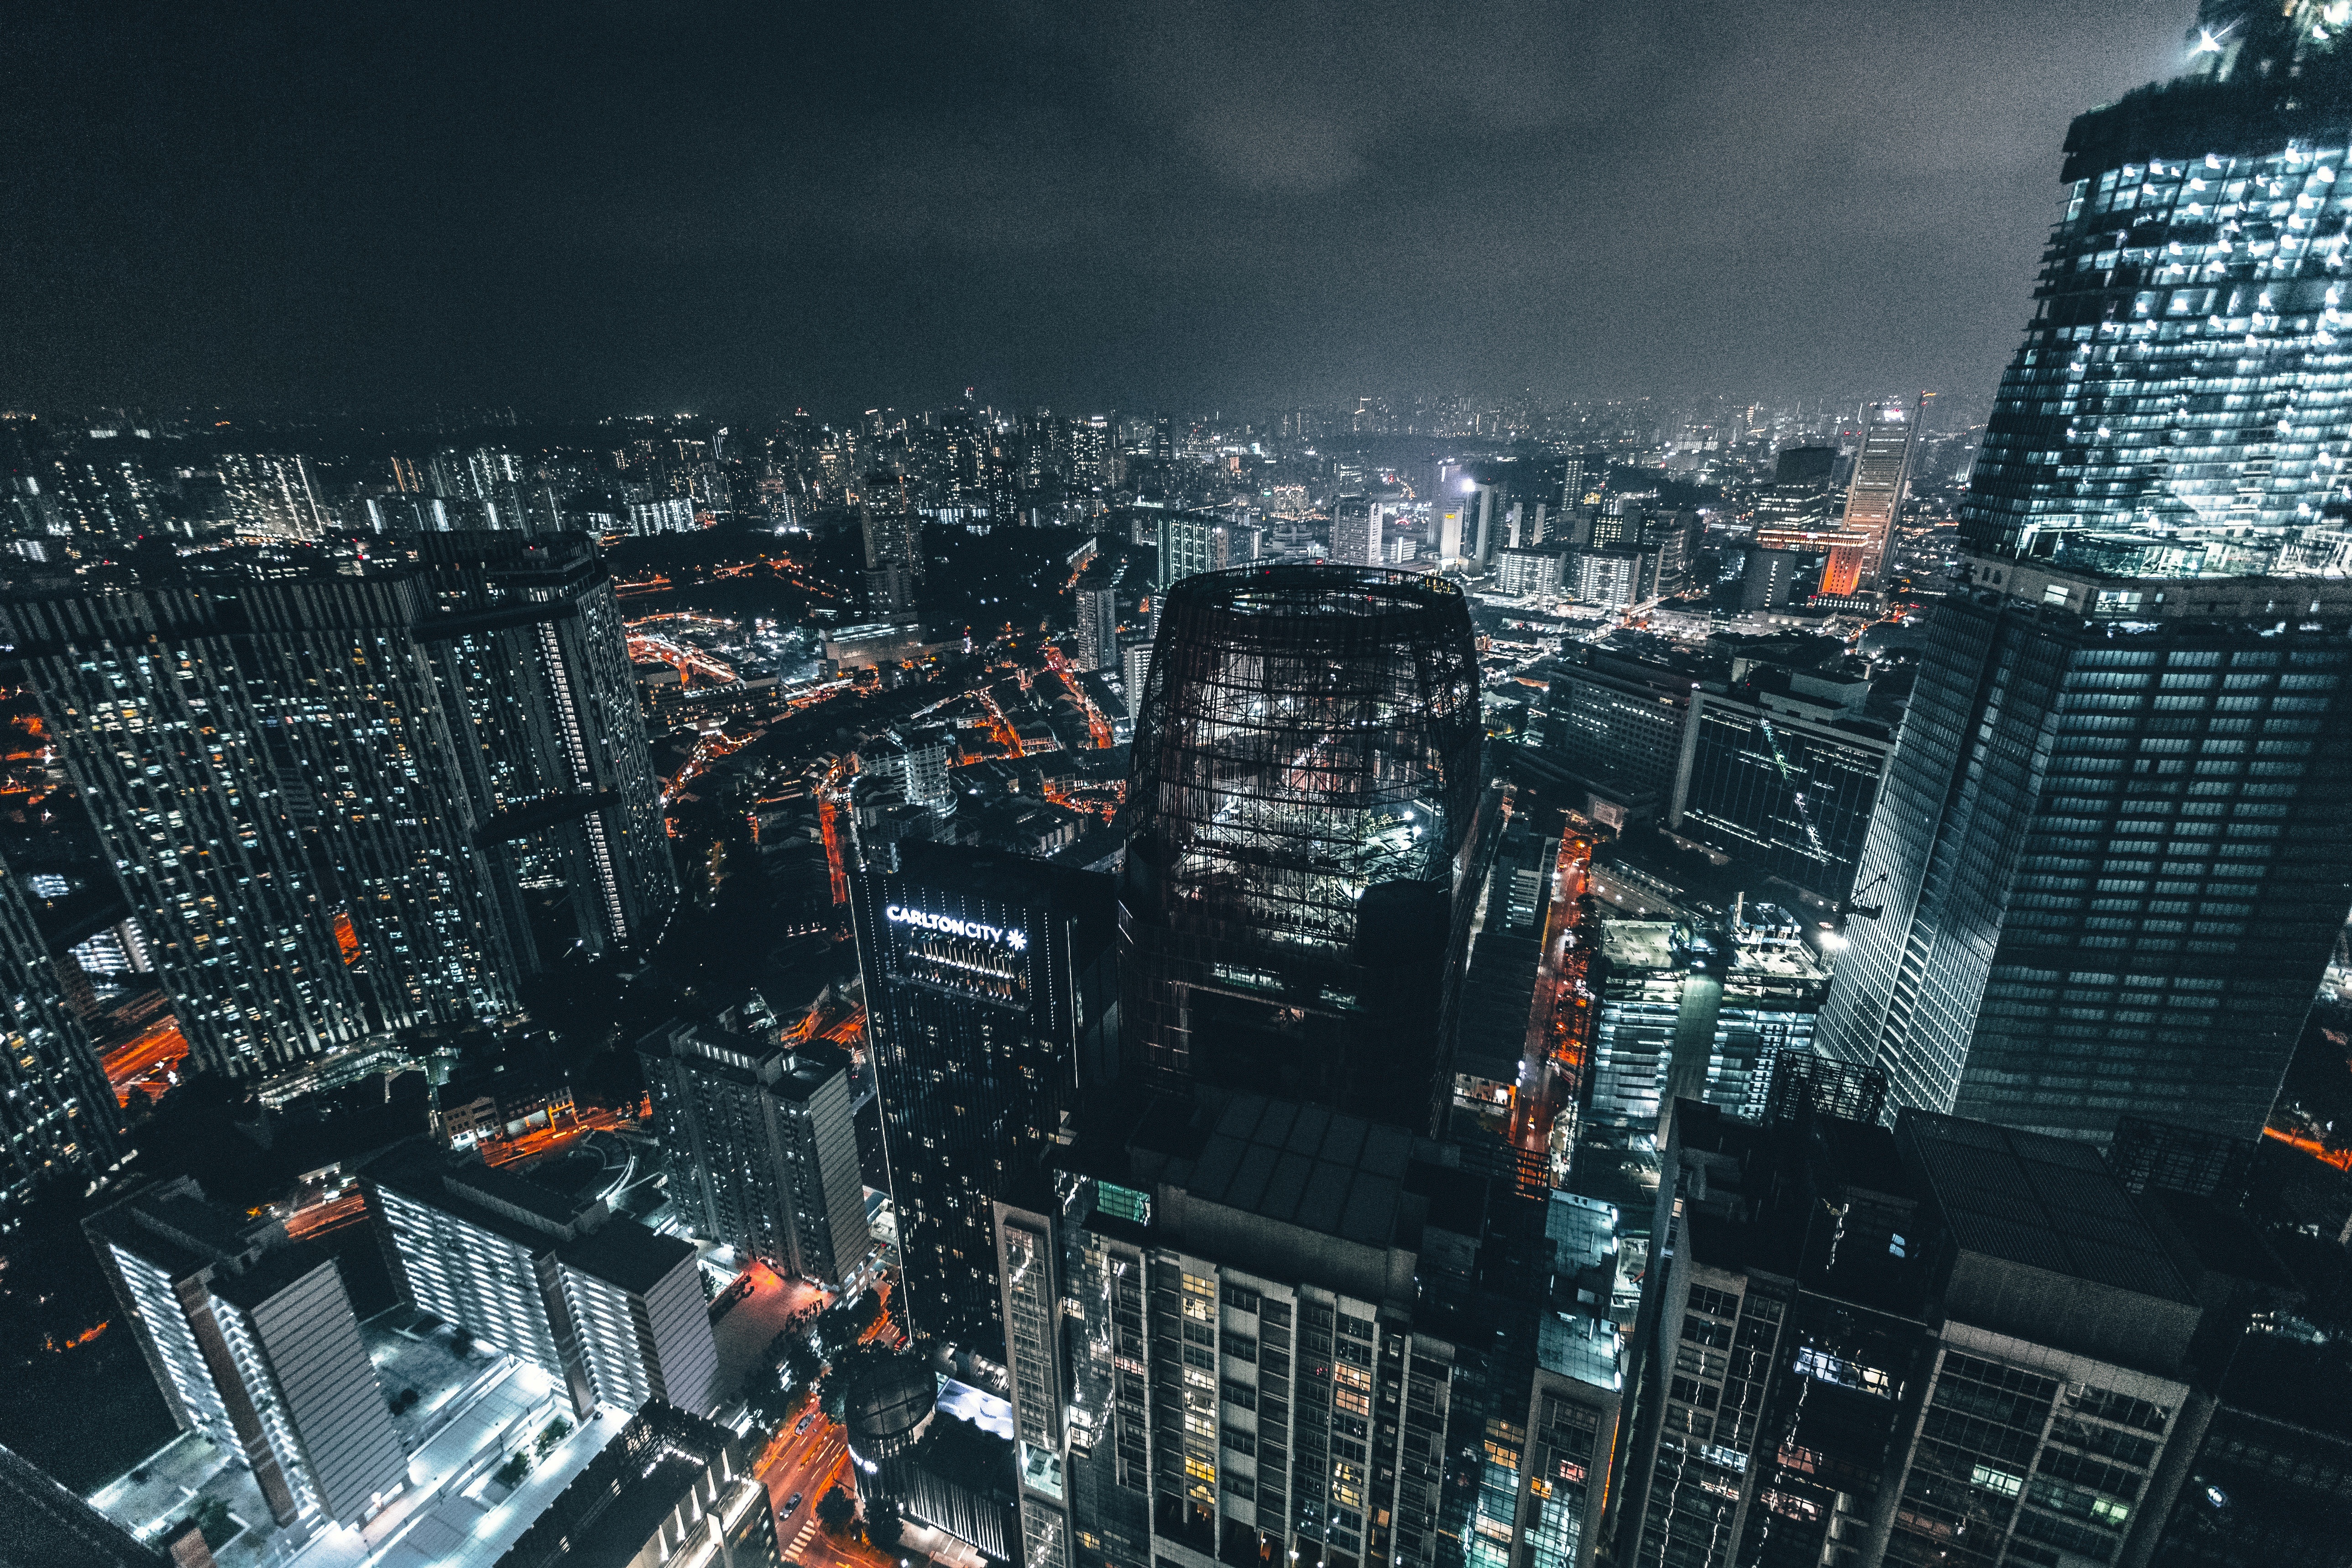 Skyscrapers Night Top View Wallpaper Hd City 4k Wallpapers Images Photos And Background Wallpapers Den